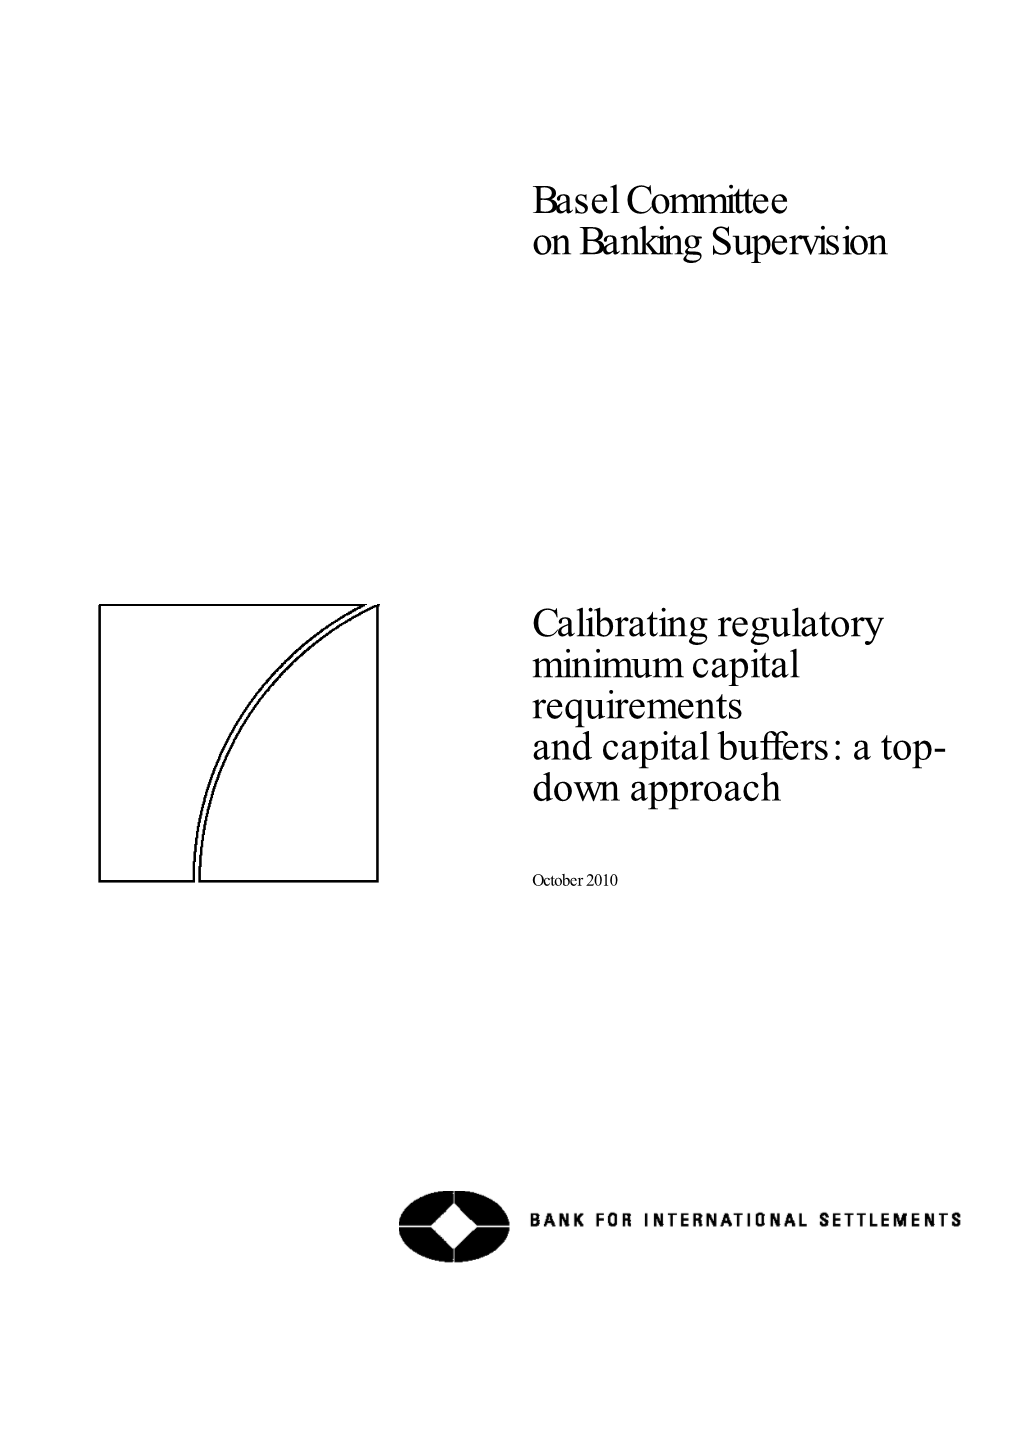 Calibrating Regulatory Minimum Capital Requirements and Capital Buffers: a Top- Down Approach